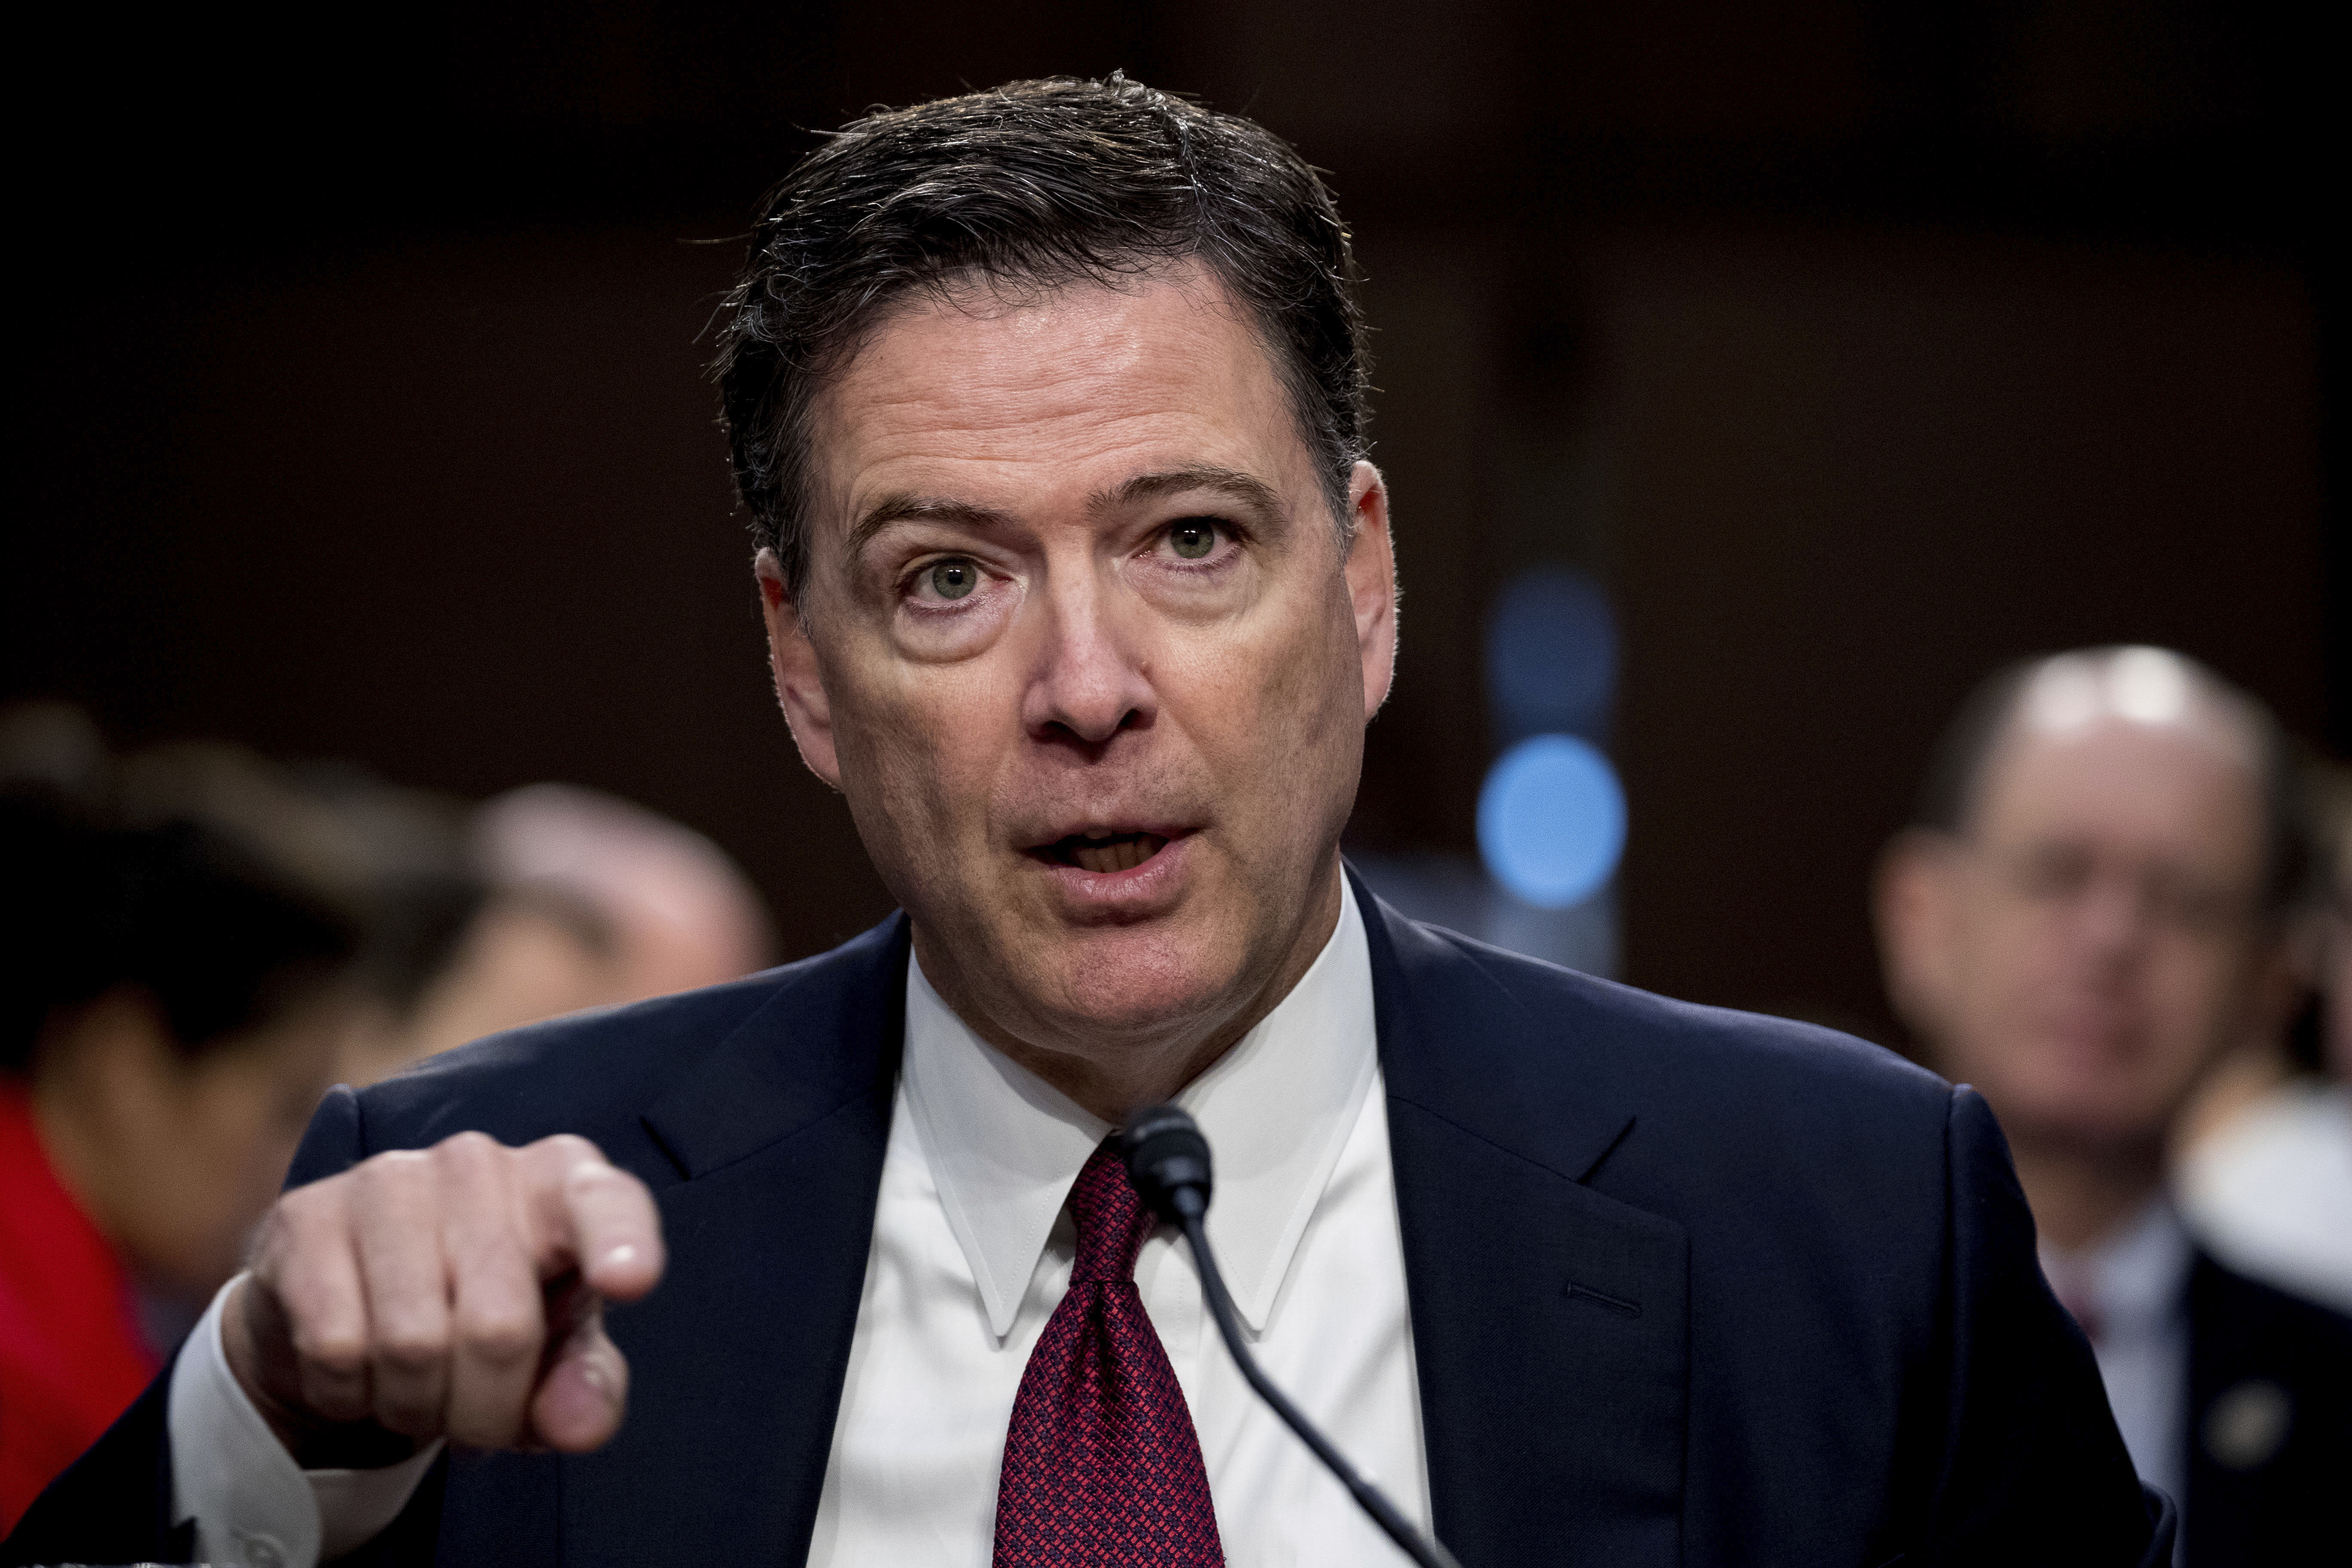 Watchdog sees errors, not bias, in Comey’s Clinton probe